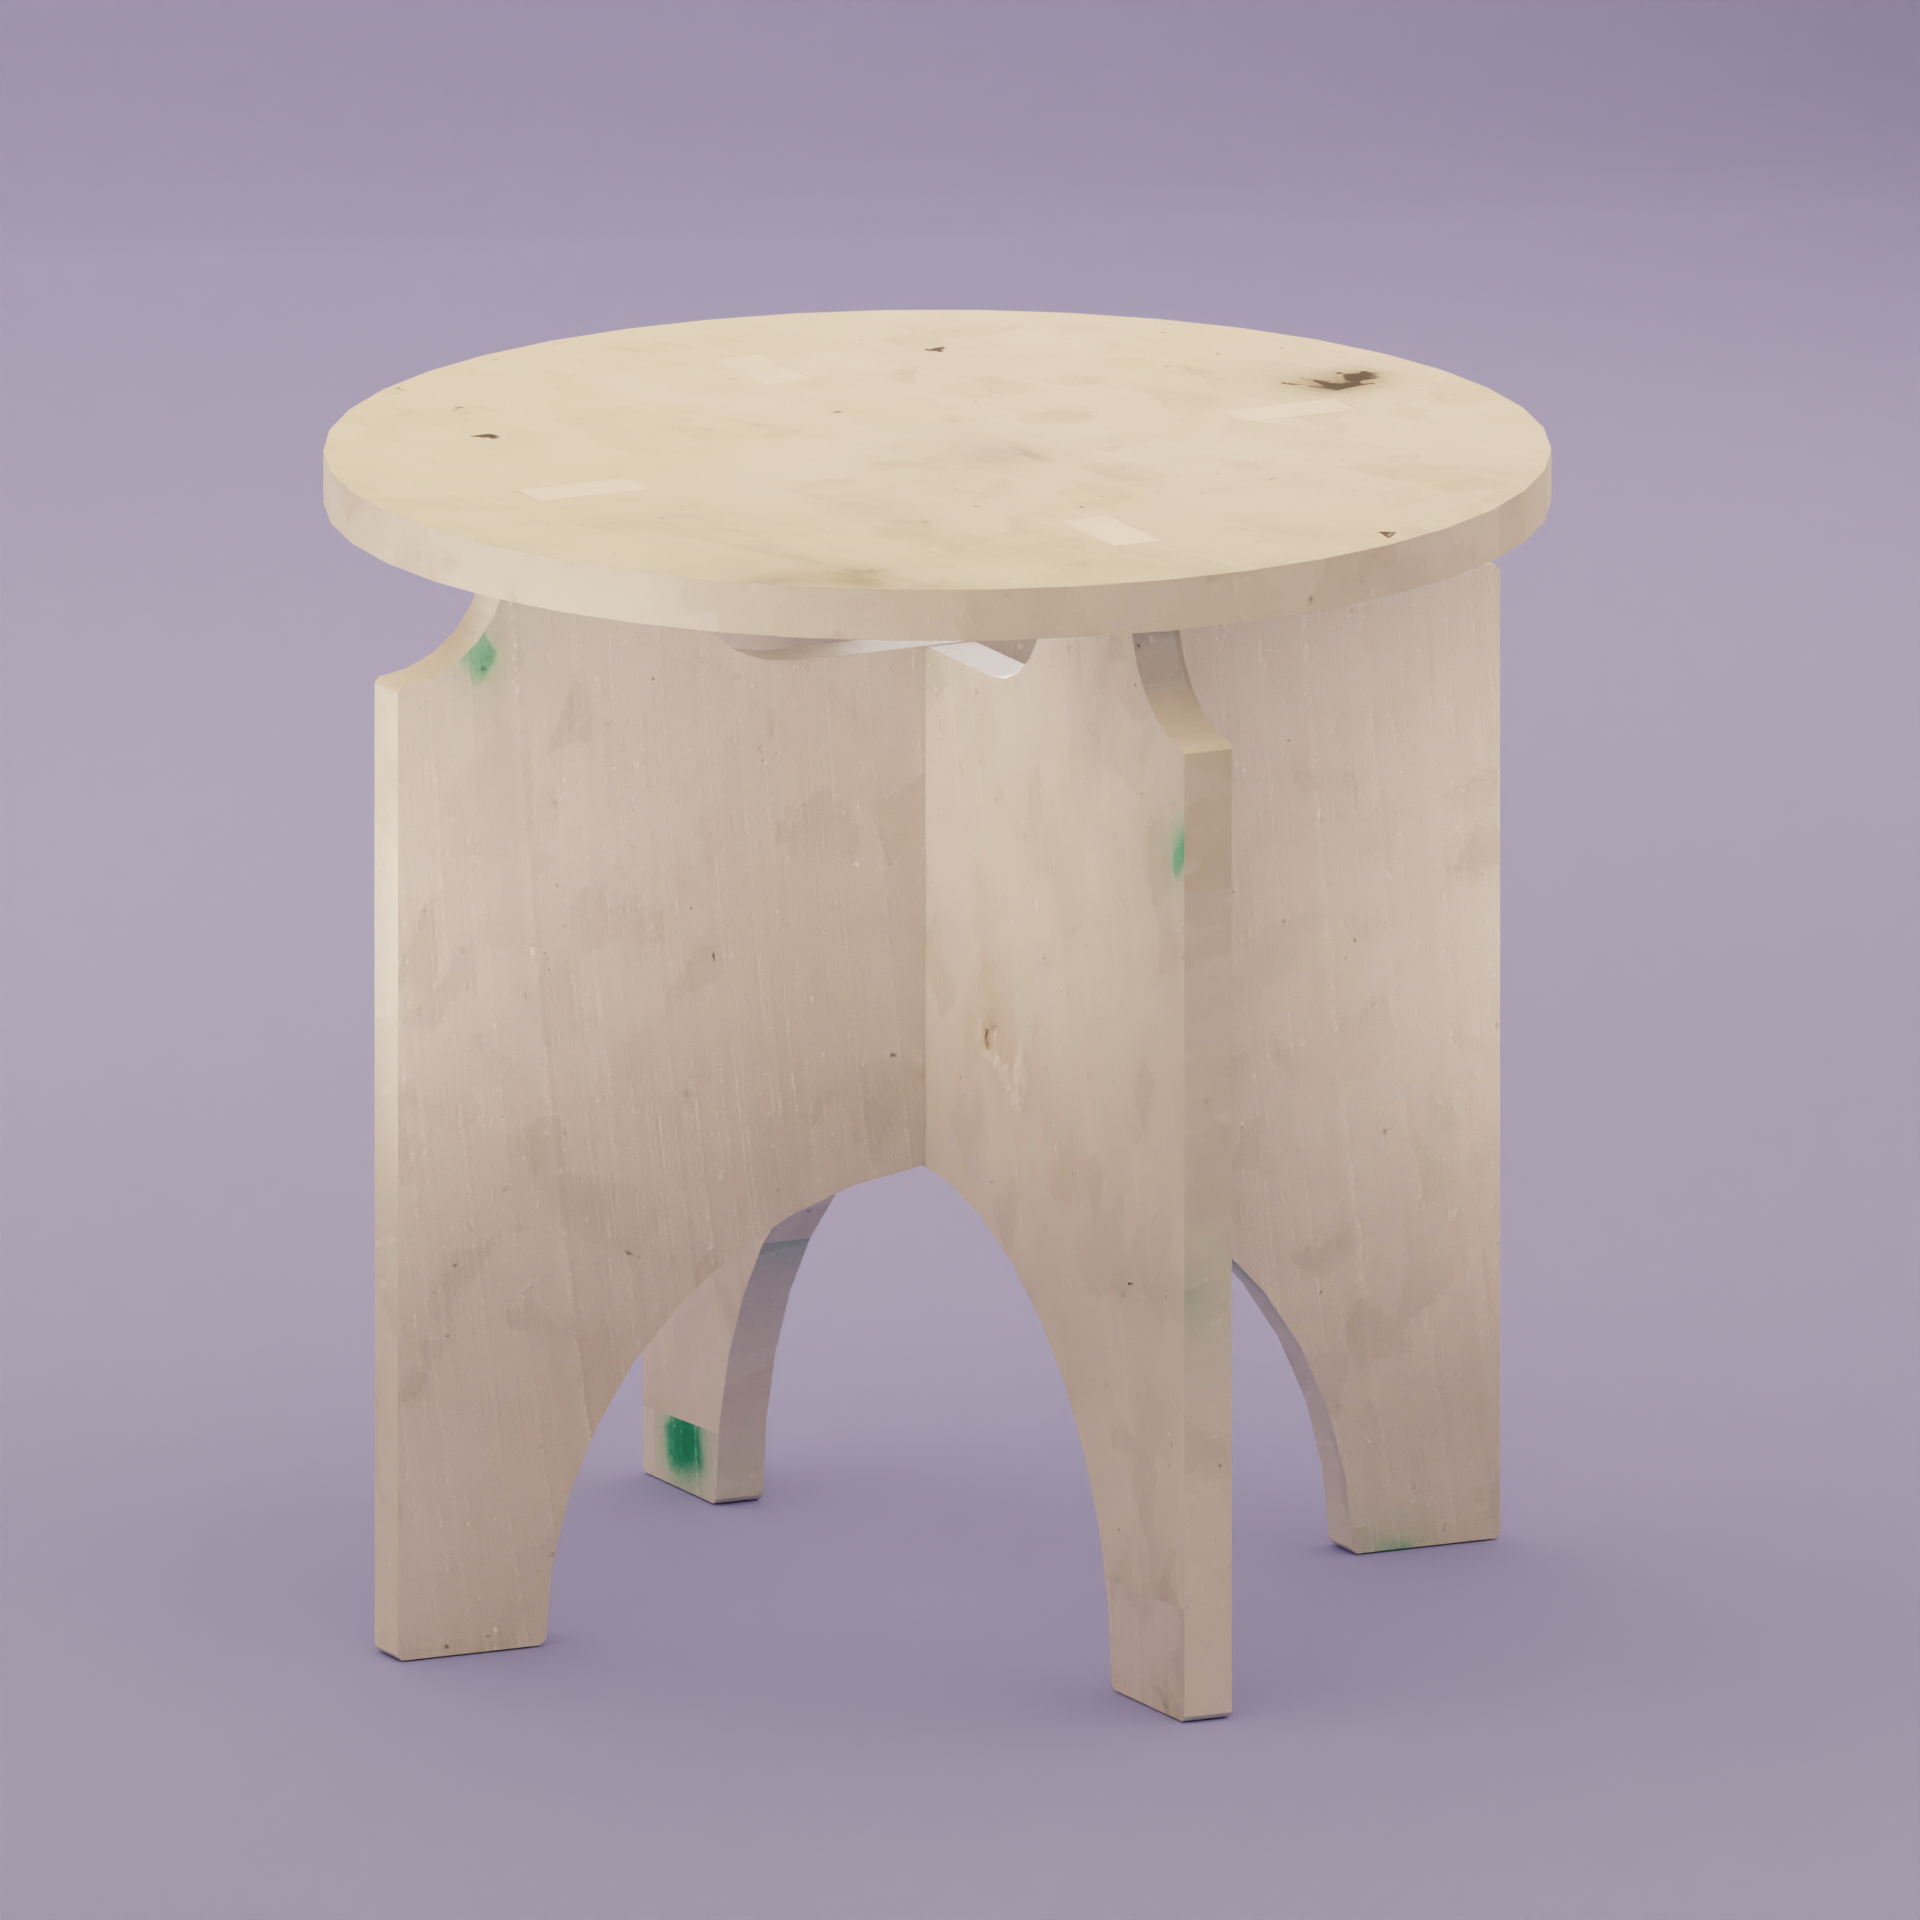 WHITE ROUND TOP STOOL BY THE MINIMONO PROJECT - BRAND FOR ECO FRIENDLY - PLAYFUL - MULTI FUNCTIONAL - SUSTAINABLE - HIGH QUALITY - DESIGN FURNITURE FROM RECYCLED PLASTIC FOR BOTH ADULT AND CHILDREN MADE IN BERLIN GERMANY